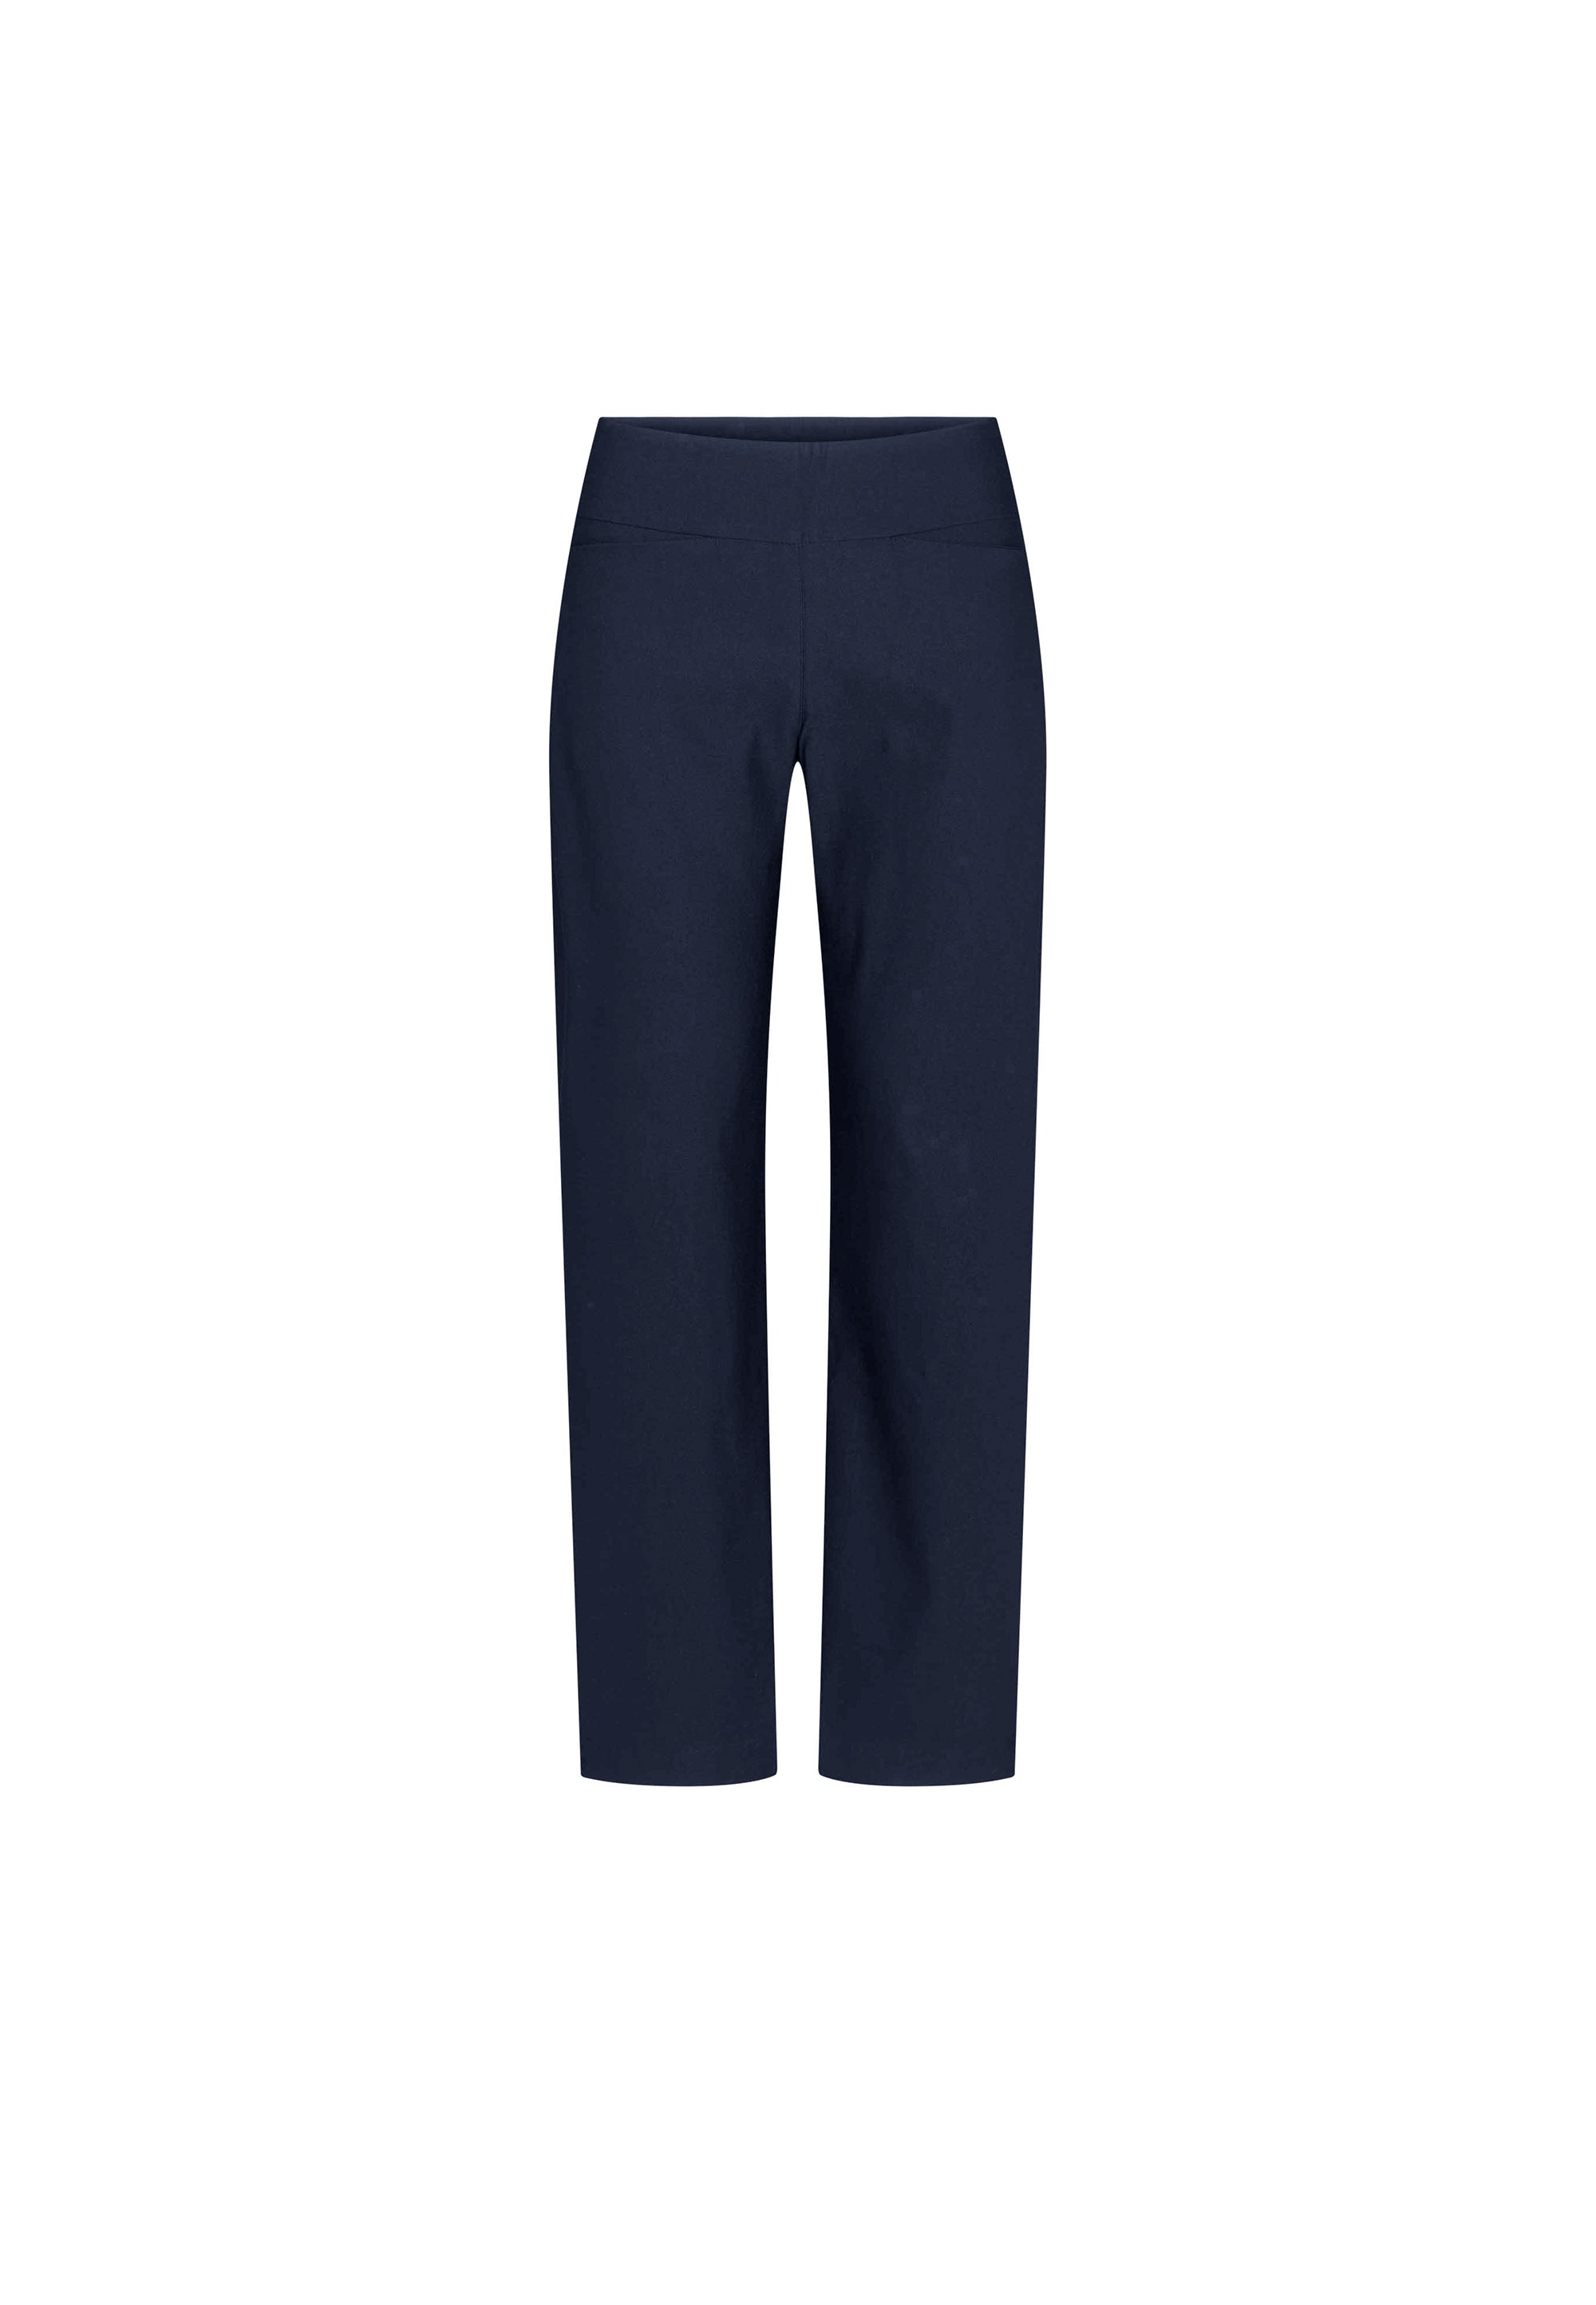 LAURIE Thea Straight - Short Length Trousers STRAIGHT 49000 Navy